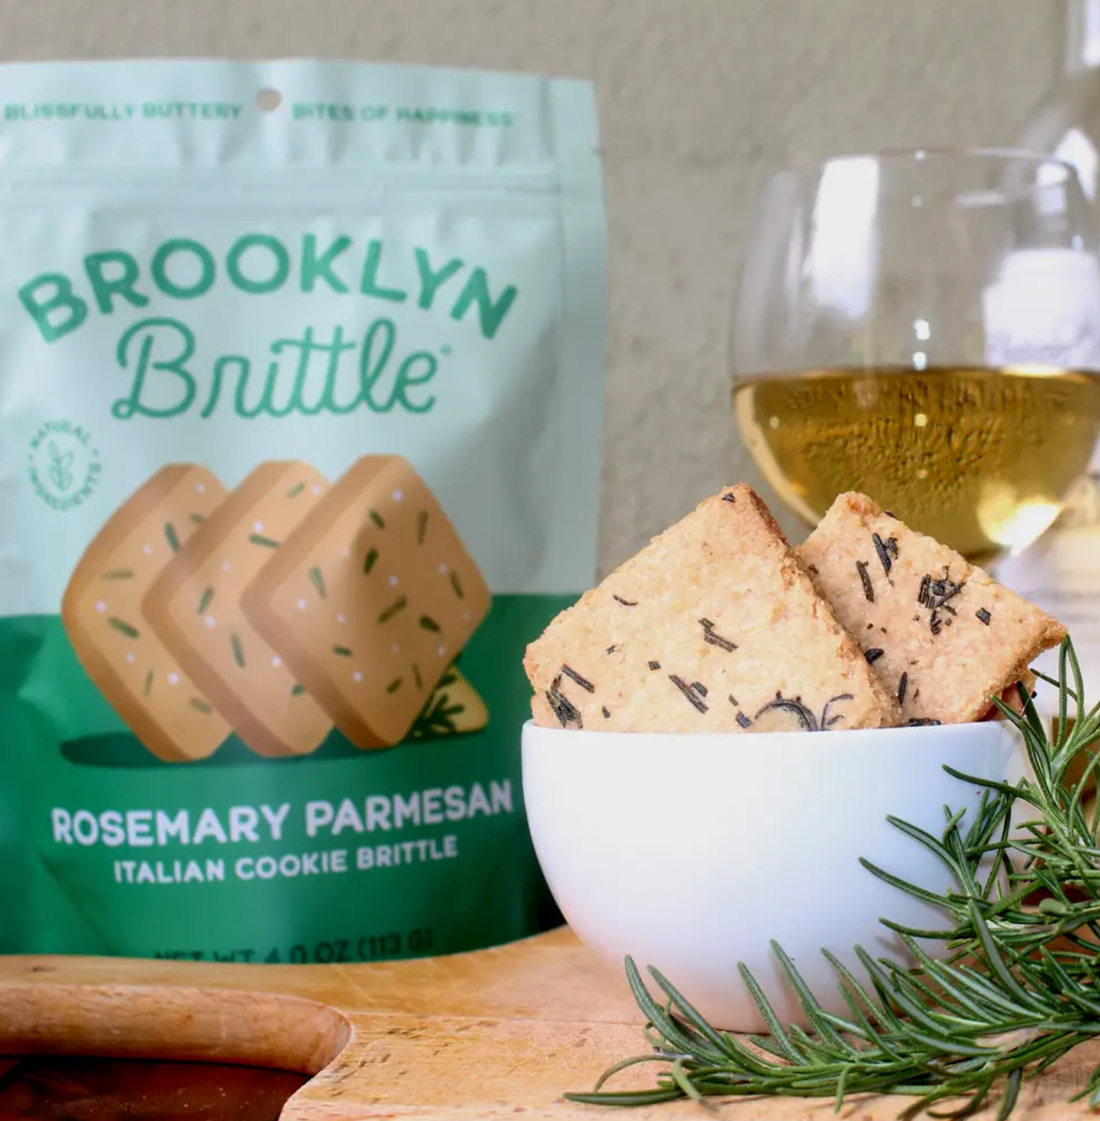 Rosemary Parmesan Cookie Brittle